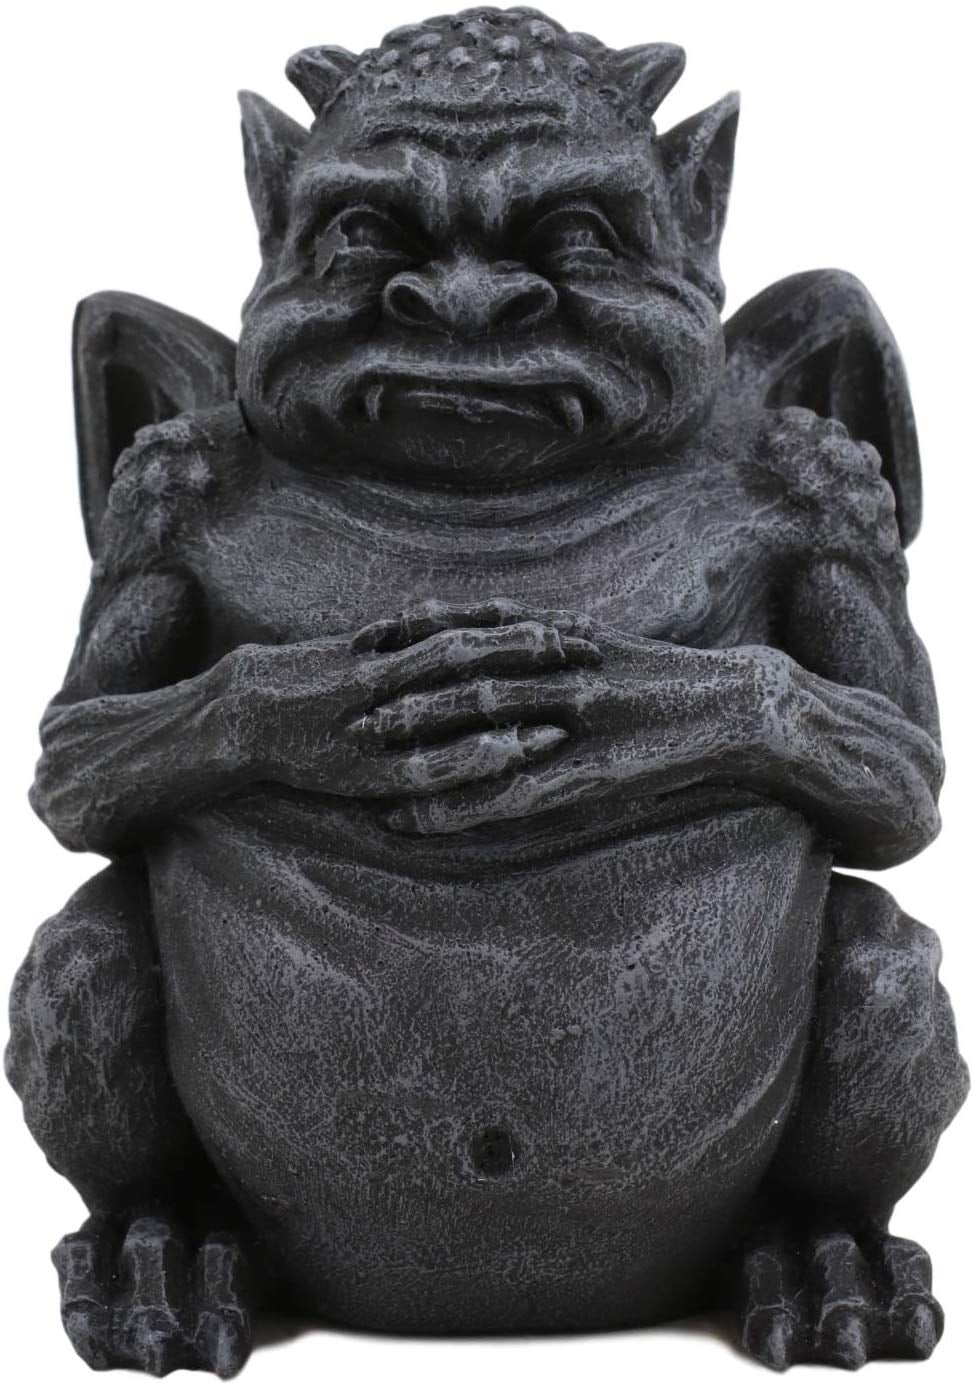 Winged Gargoyle Sculpture Resin Statue 12 Inch Tall Medieval Collectible 